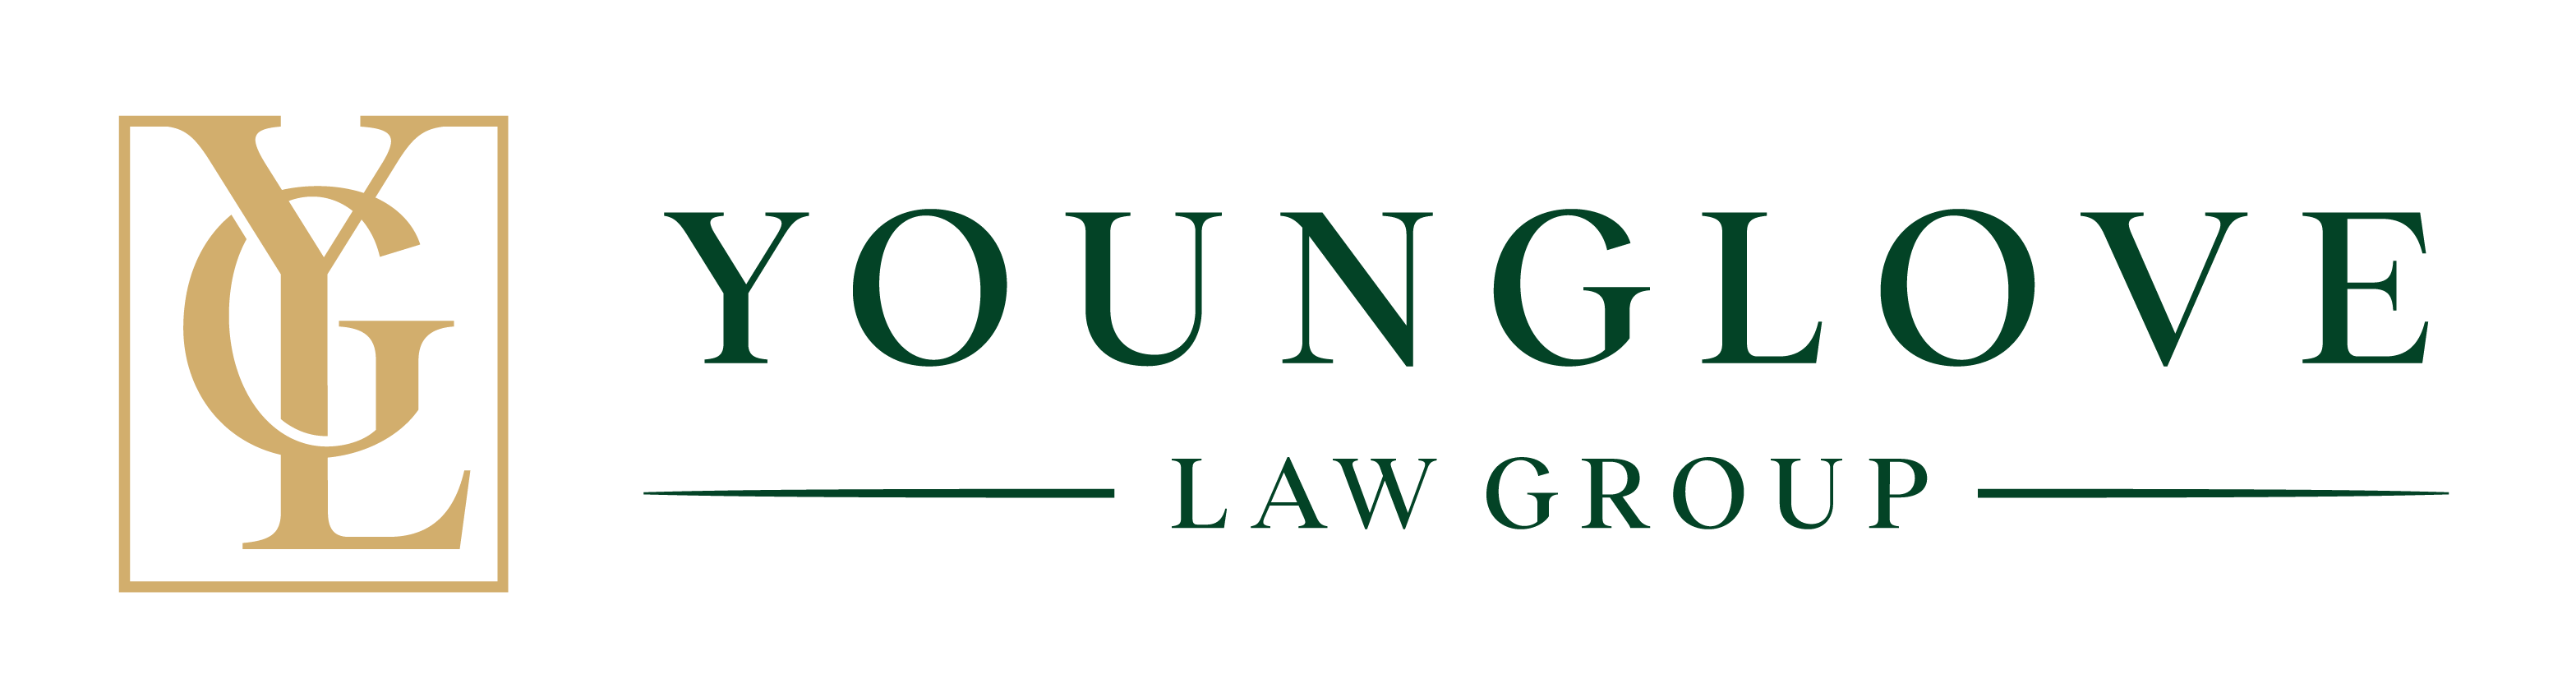 Younglove Law Group